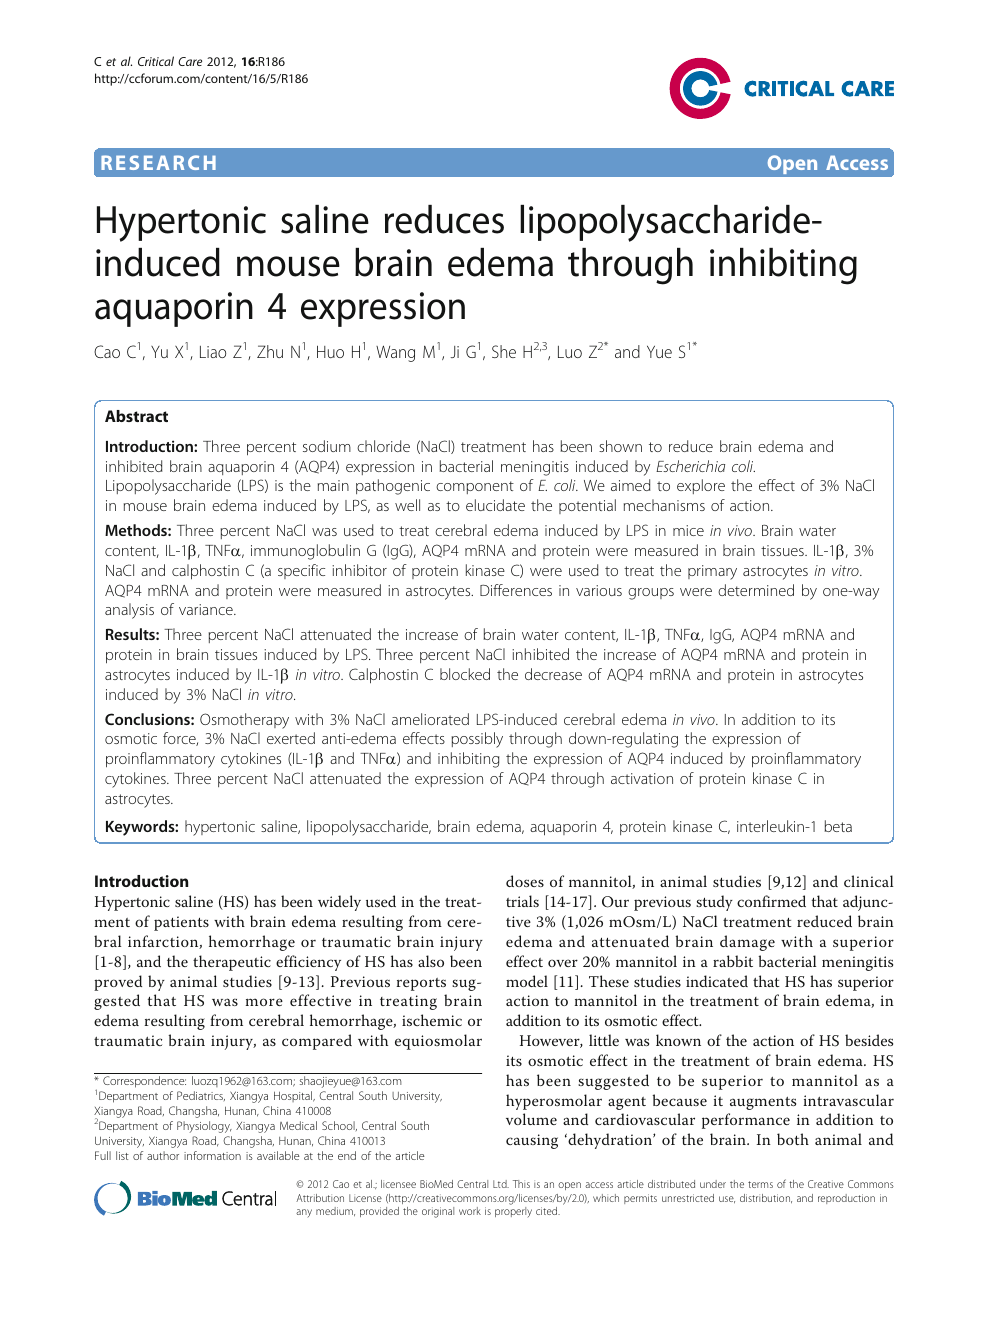 Hypertonic Saline Reduces Lipopolysaccharide Induced Mouse Brain Edema Through Inhibiting Aquaporin 4 Expression Topic Of Research Paper In Clinical Medicine Download Scholarly Article Pdf And Read For Free On Cyberleninka Open Science